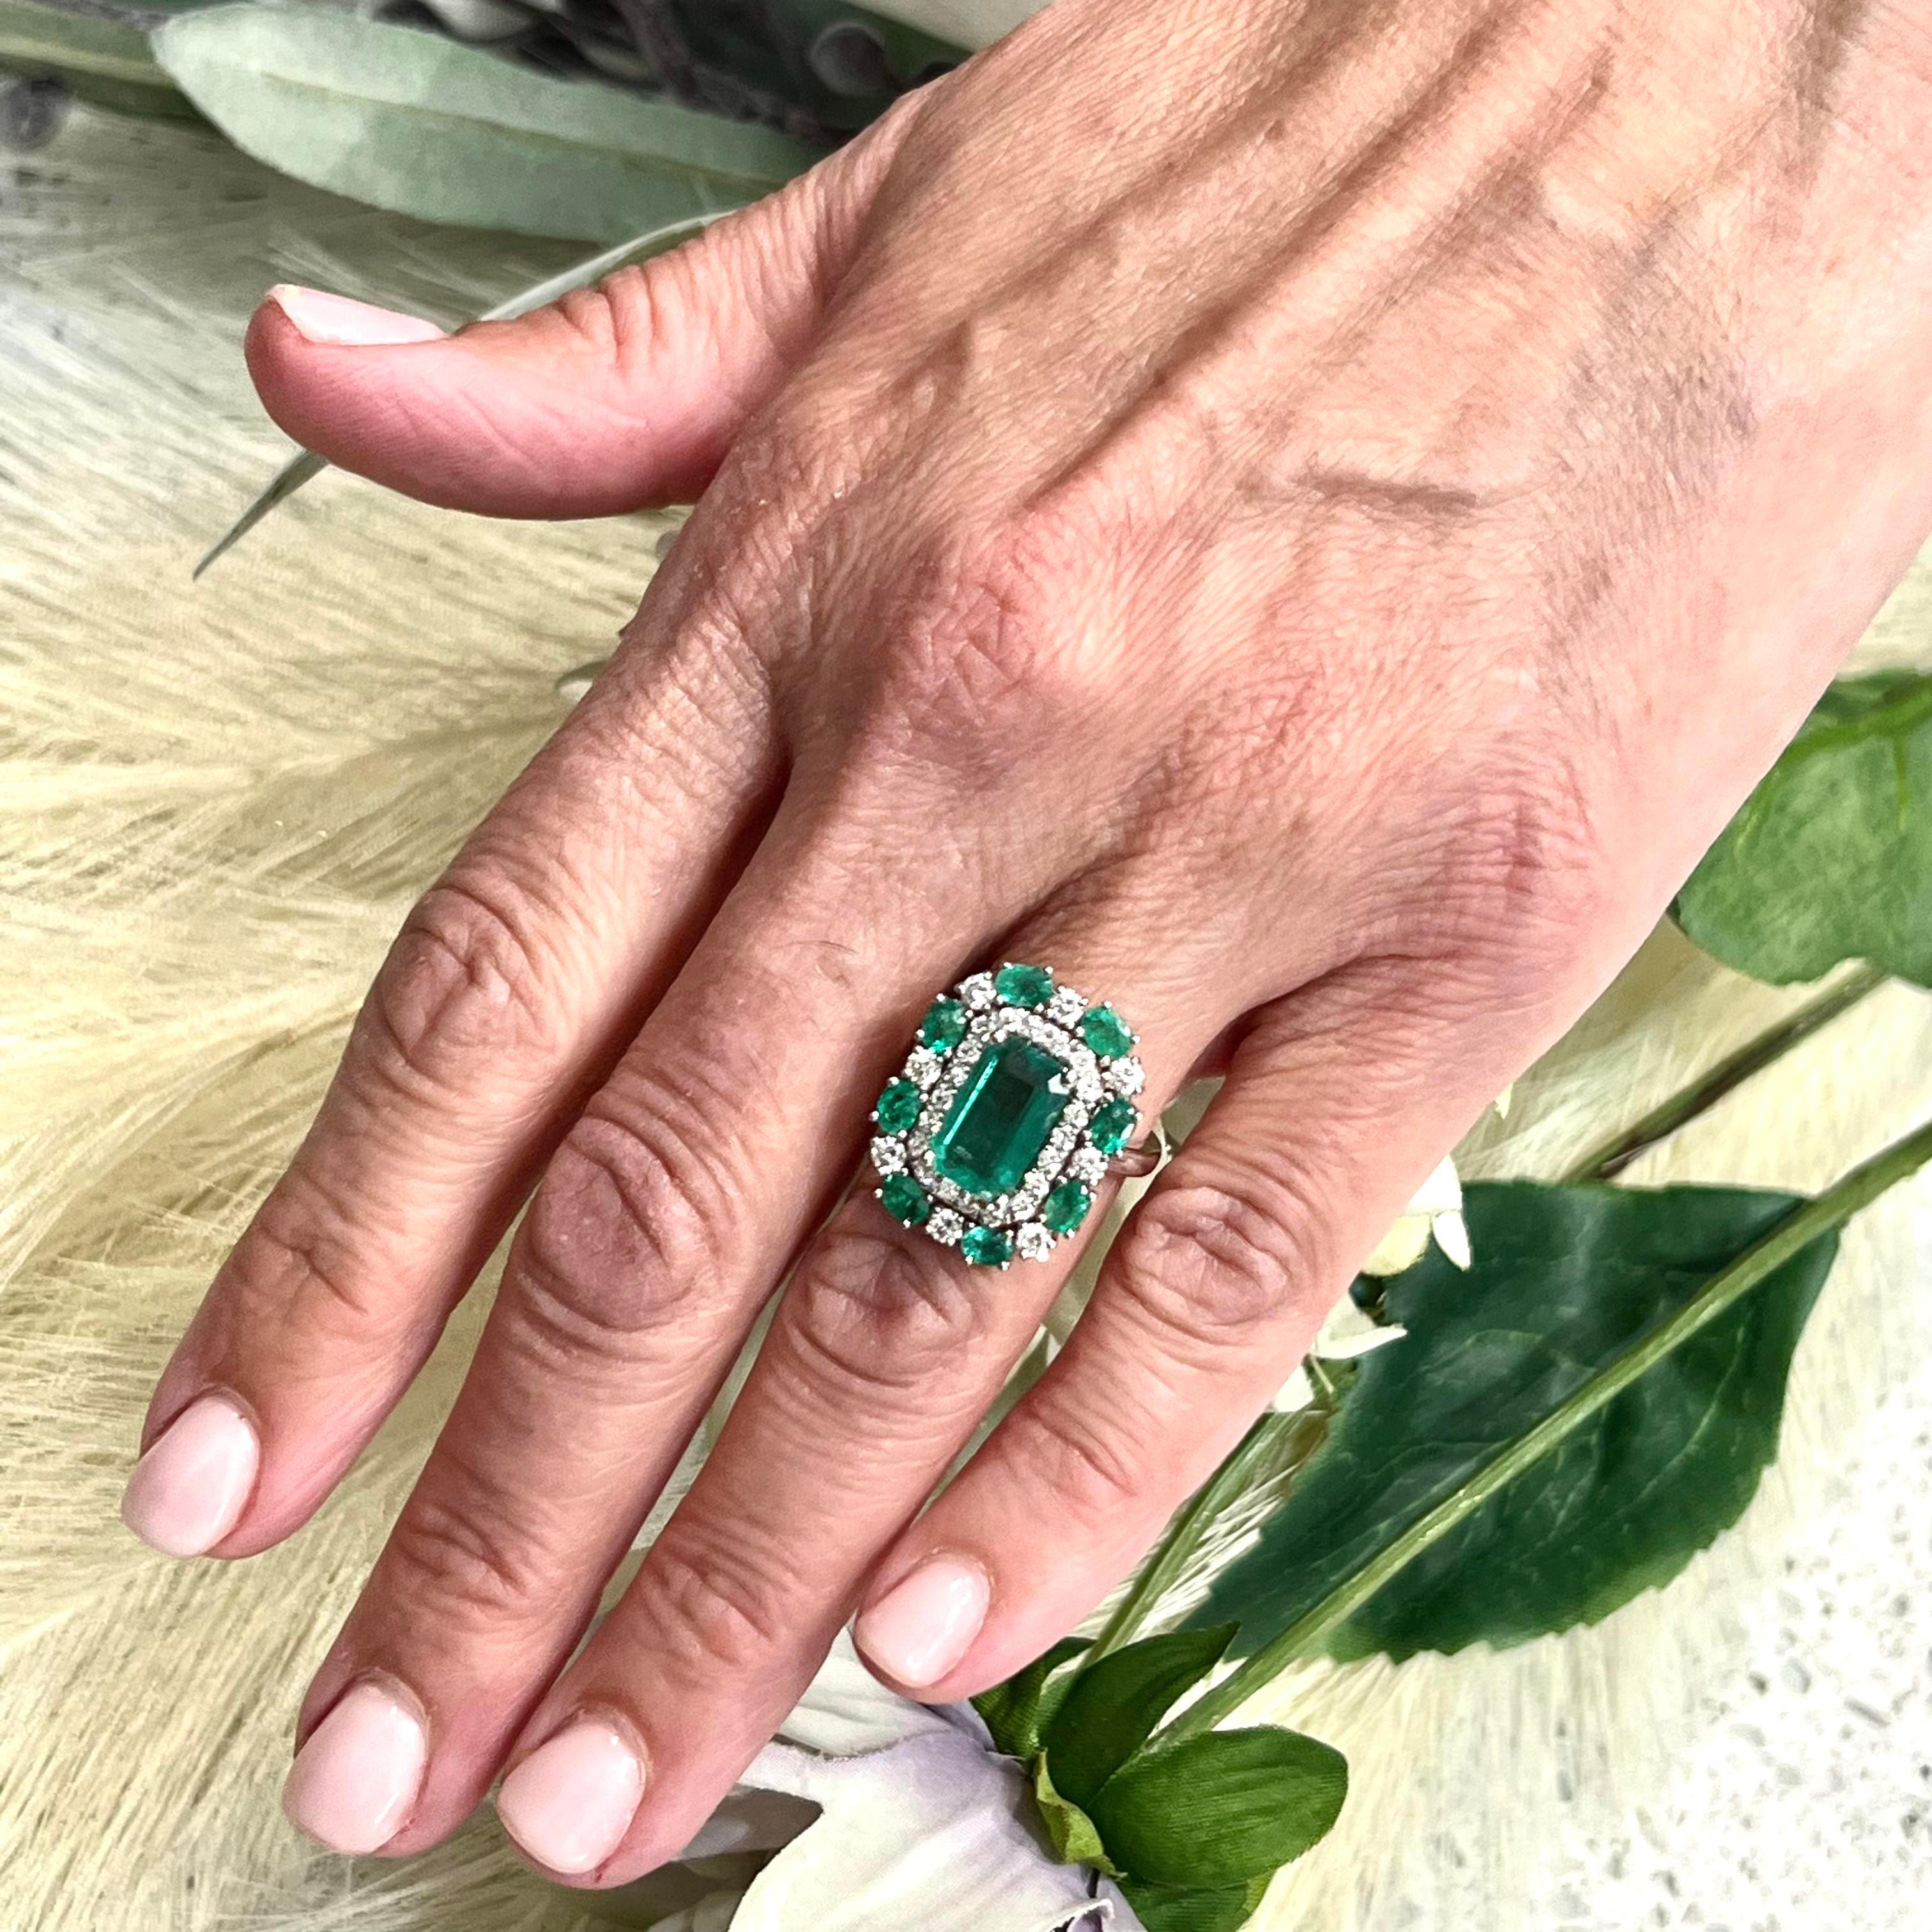 Natural Finely Faceted Quality Emerald Diamond Ring 6.5 14k Gold 4.52 TCW GIA Certified $12,950 210738

This is a Unique Custom Made Glamorous Piece of Jewelry!

Nothing says, “I Love you” more than Diamonds and Pearls!

This Emerald ring has been